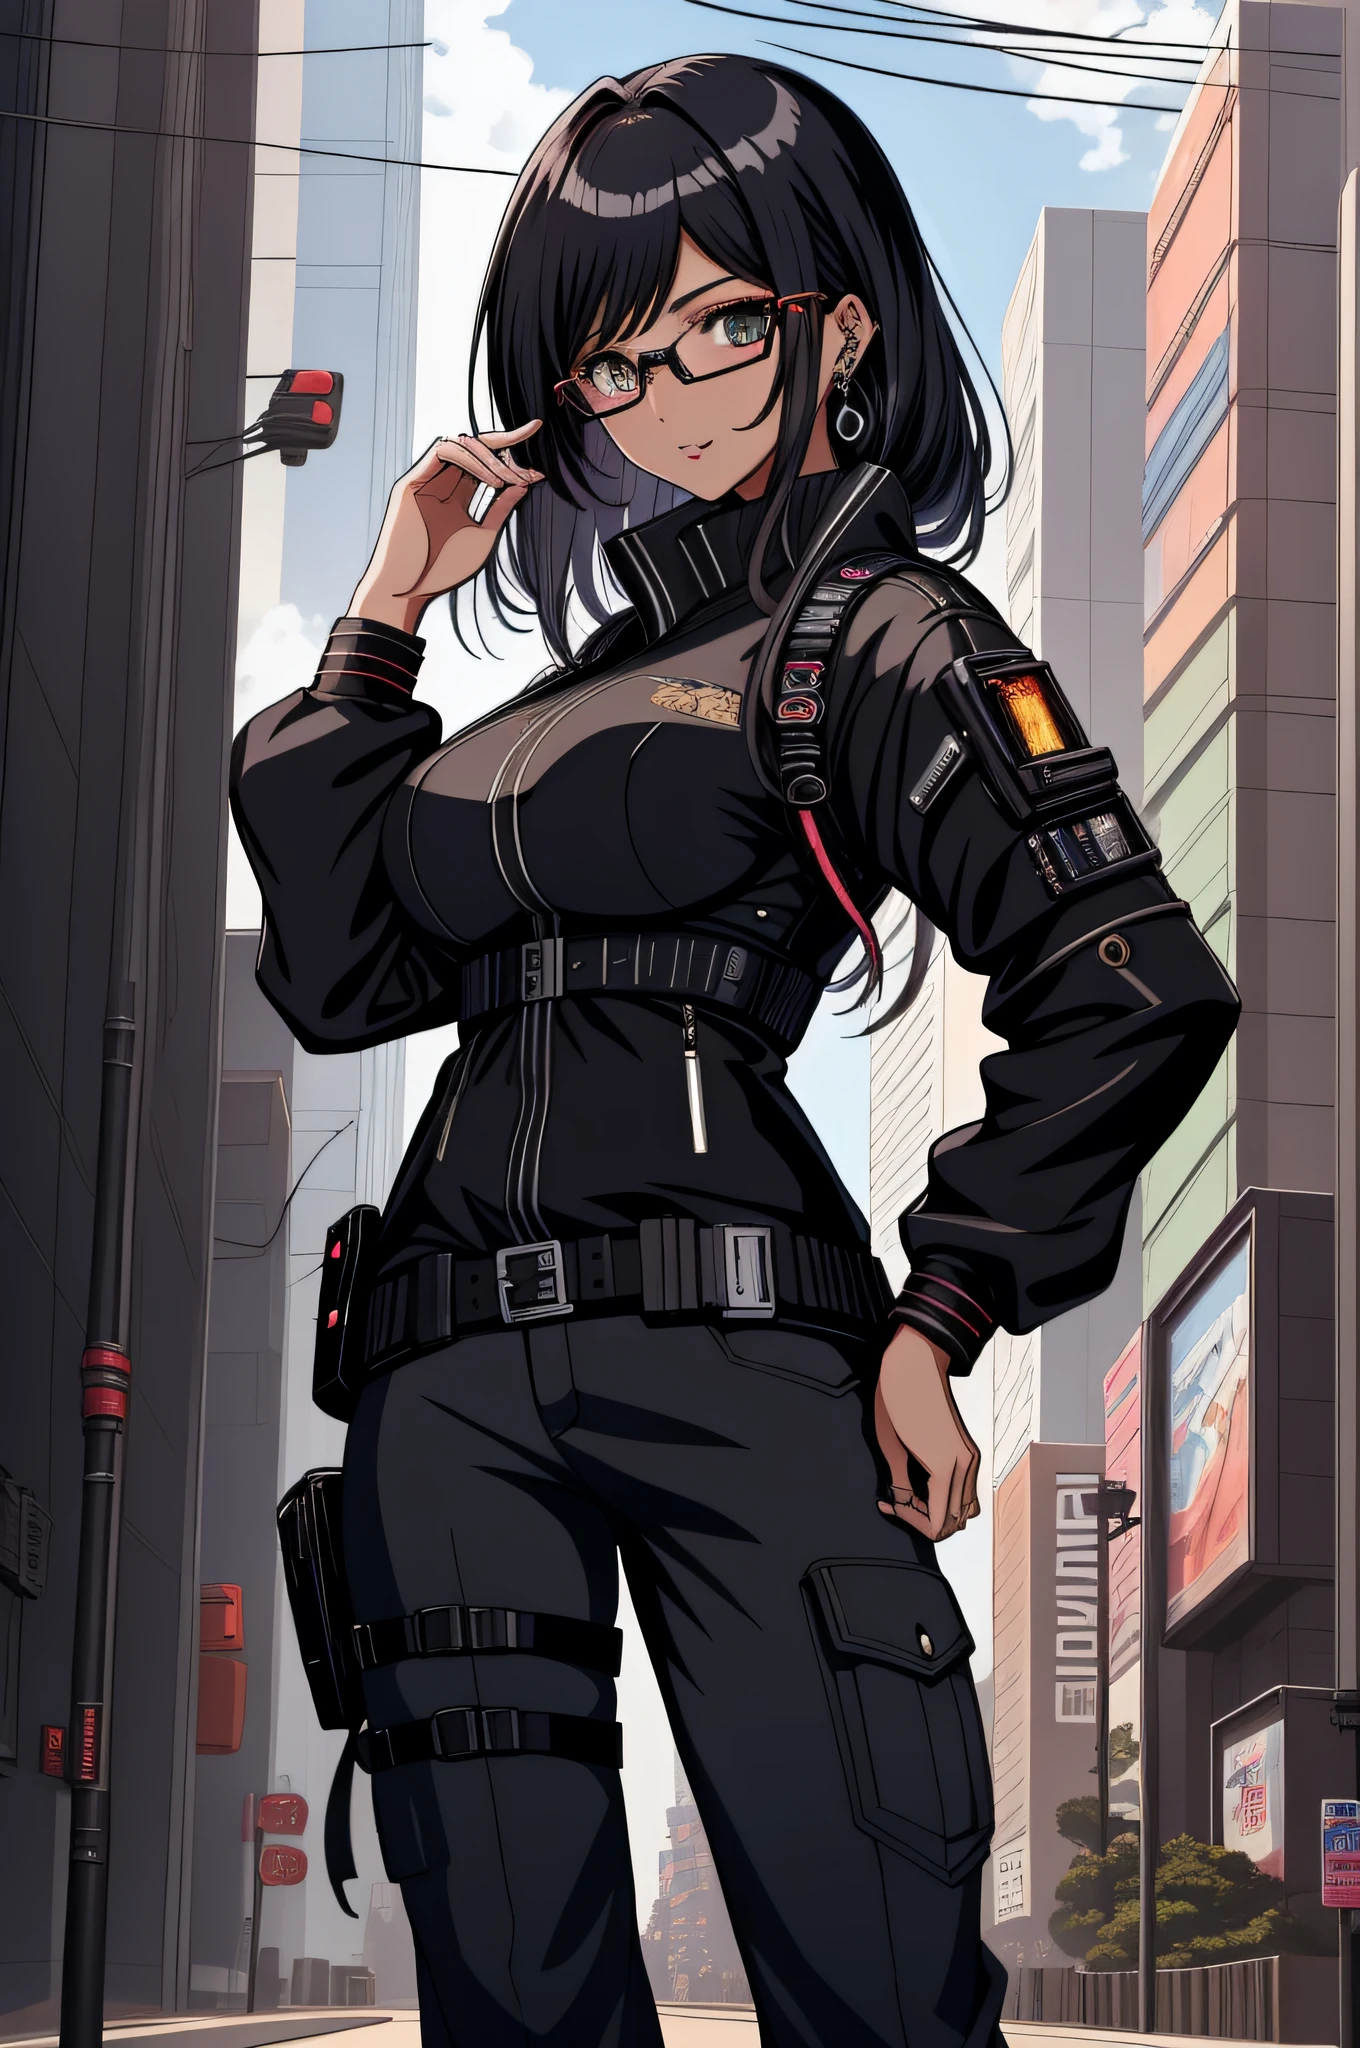 Anime - imagem de estilo 1mulher com olhos azuis e Bblack hair, Bblack hair, thick eyebrow, face of a 27 year old woman, 27 year old young man, cloused mouth, fully body, cyberpunk anime art, tom de pele branca, (cloused mouth: 1.5), hand on hip, (double eyelid), (Bblack hair: 1.3), (shorth hair: 1.3), wearing dress, digital cyberpunk anime art, cyberpunk anime art, range murata and artgerm, eyeglass, futuristic clothing, hand on hip, (whole body: 1.7), wearing dress, stylish pants, Technological dress, transparent spectacle lenses, 极其详细的Artgerm, modern cyberpunk anime, artgerm and atey ghailan, artgerm and genzoman, cloused mouth